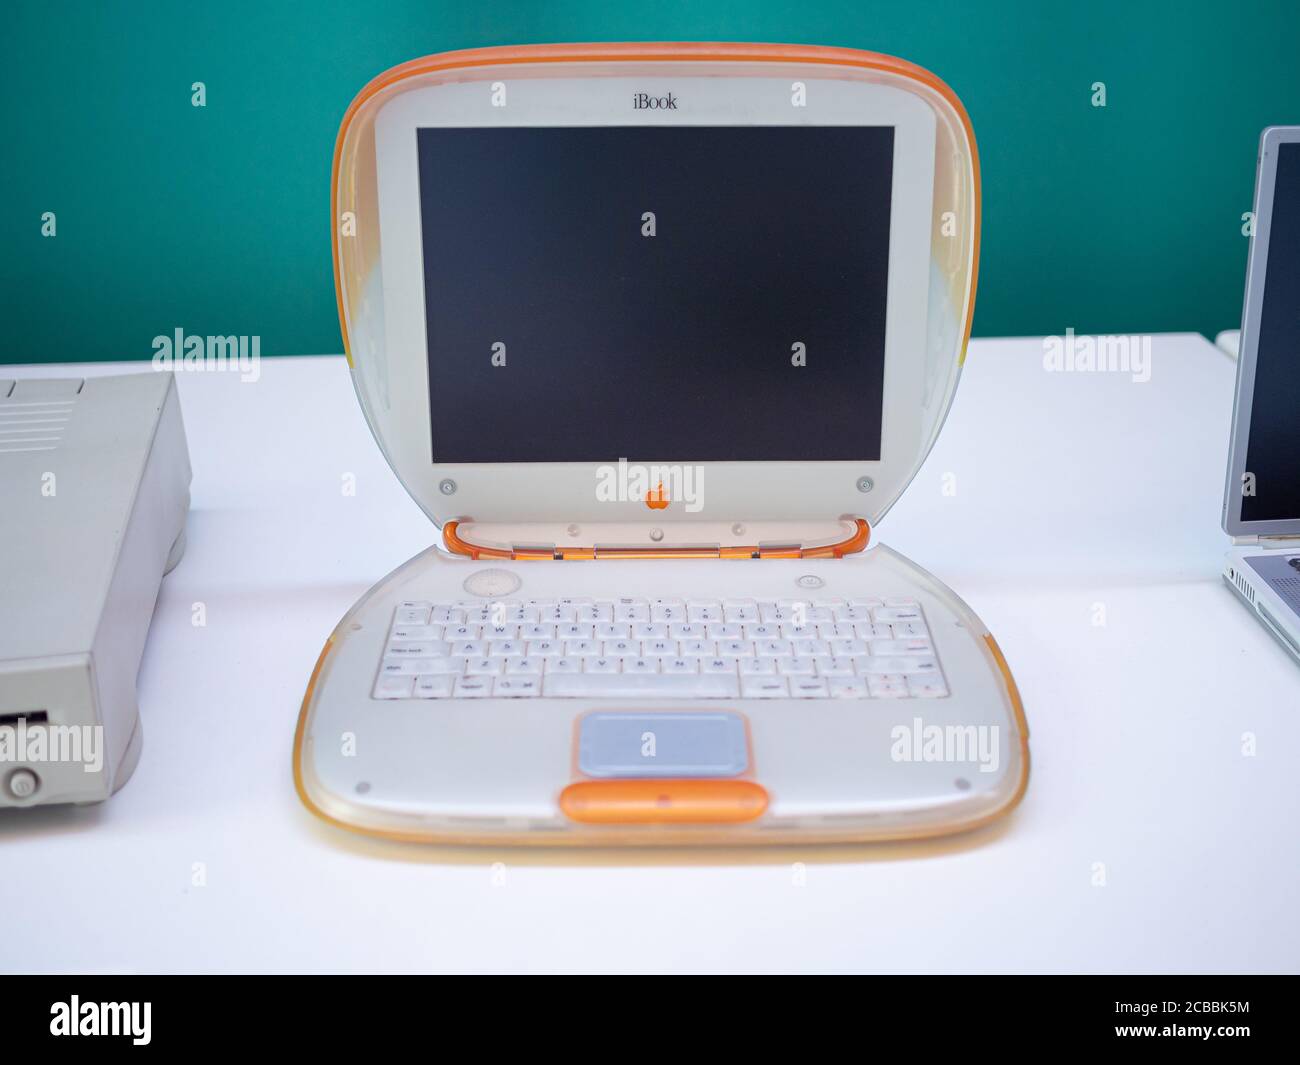 TERRASSA, SPAIN-AUGUST 9, 2020: 1999 original Apple iBook G3 ('Clamshell') laptop computer in the National Museum of Science and Technology of Catalon Stock Photo